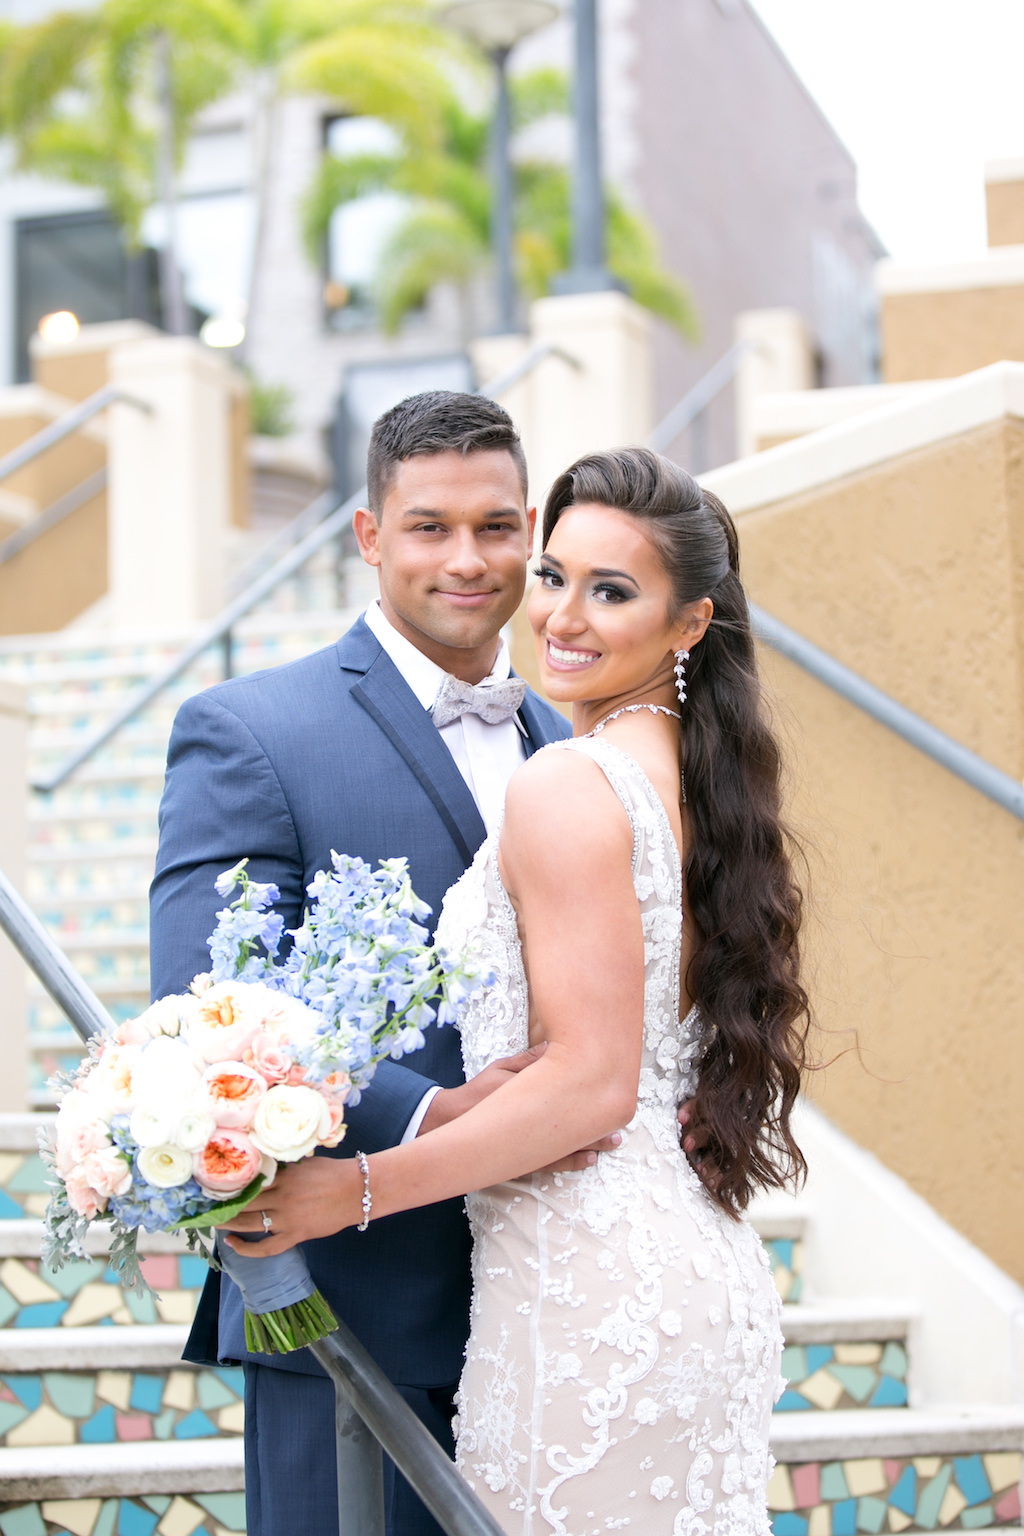 Florida Bride and Groom Wedding Portrait, Bride with White, Blush Pink and Dusty Blue floral Bouquet | Tampa Bay Photographer Carrie Wildes Photography | Hair and Makeup Destiny and Light Hair and Makeup Group | Wedding Attire Nikki's Glitz and Glam Boutique | Florist Gabro Event Services